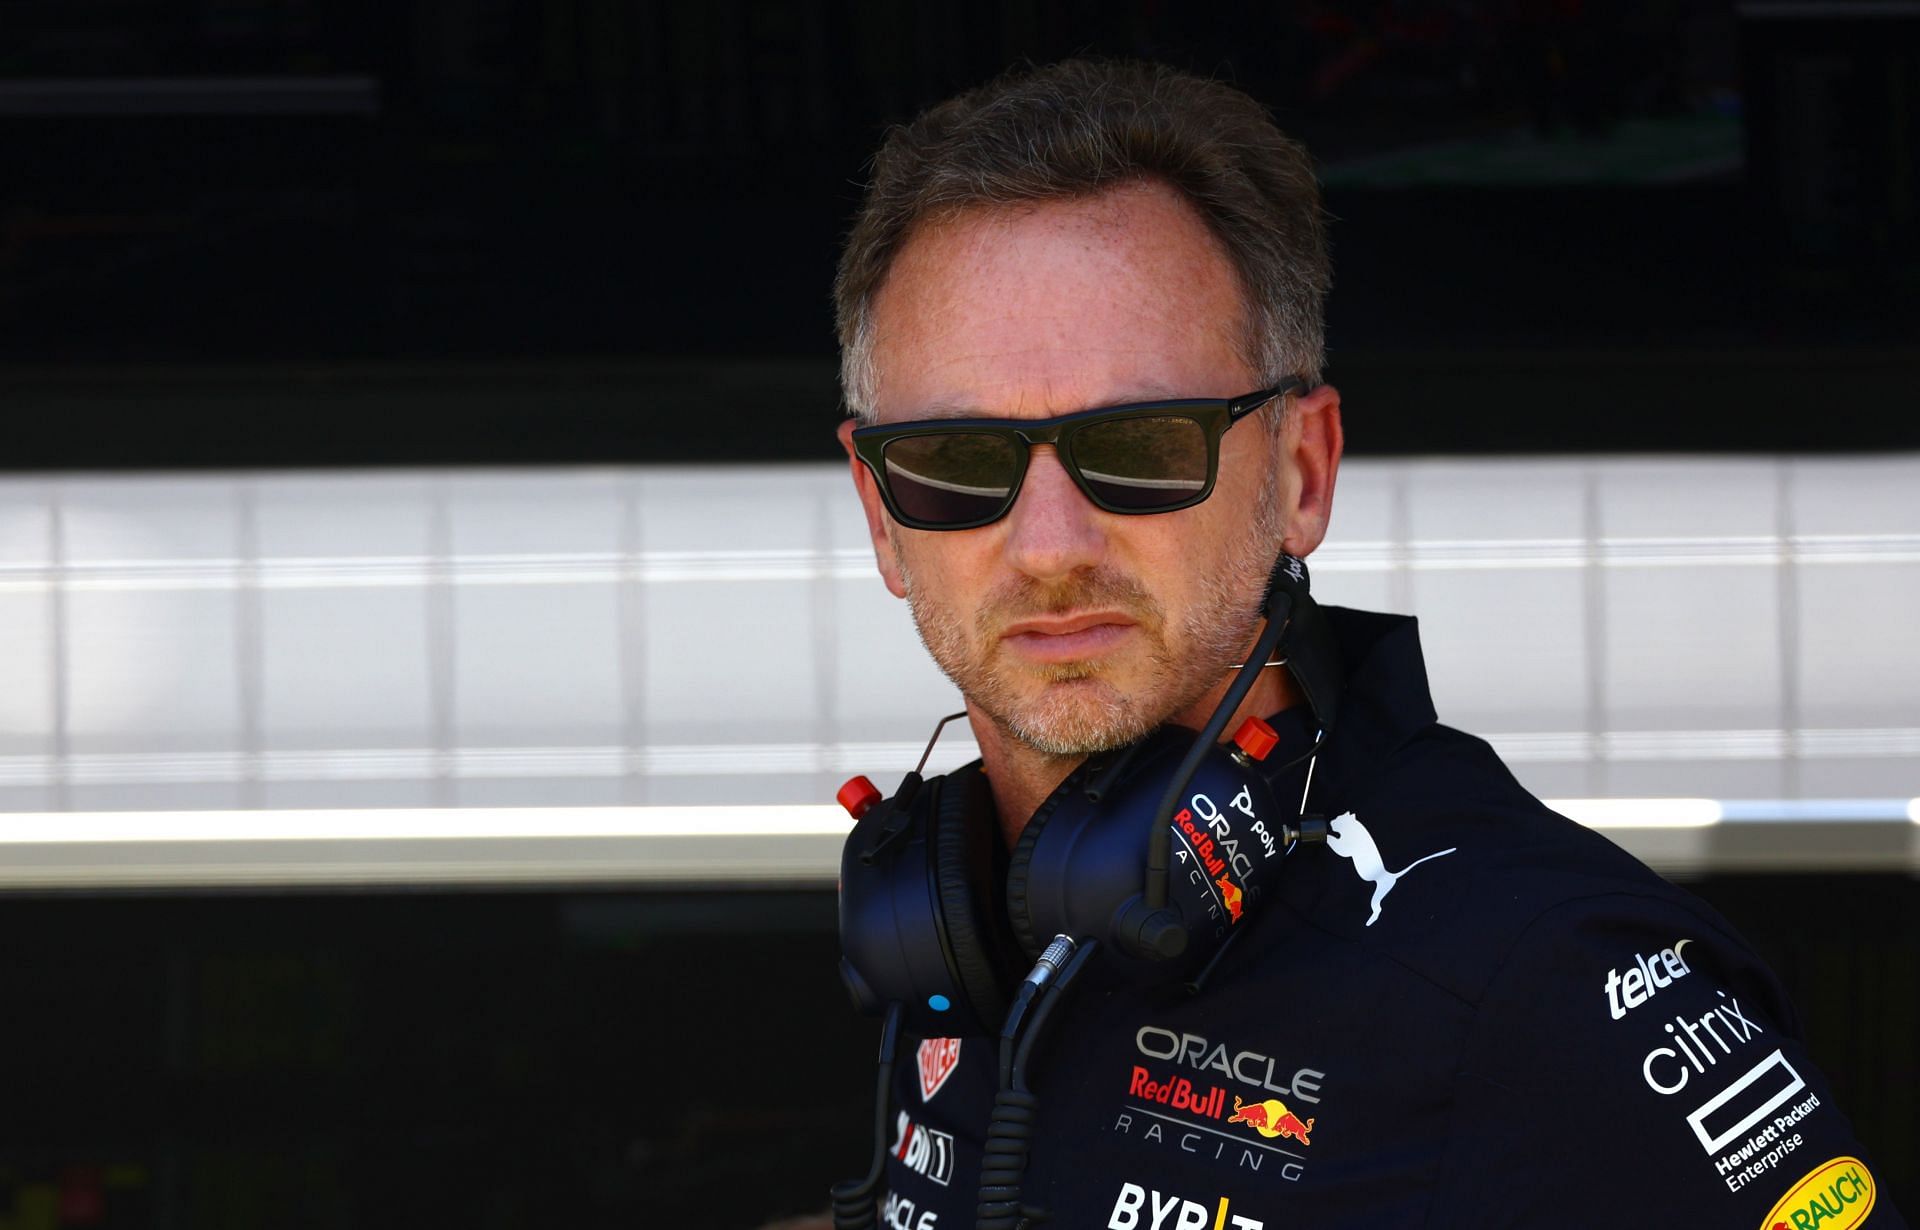 Red Bull team principal Christian Horner looks on from the paddock during the 2022 F1 French GP weekend. (Photo by Mark Thompson/Getty Images)